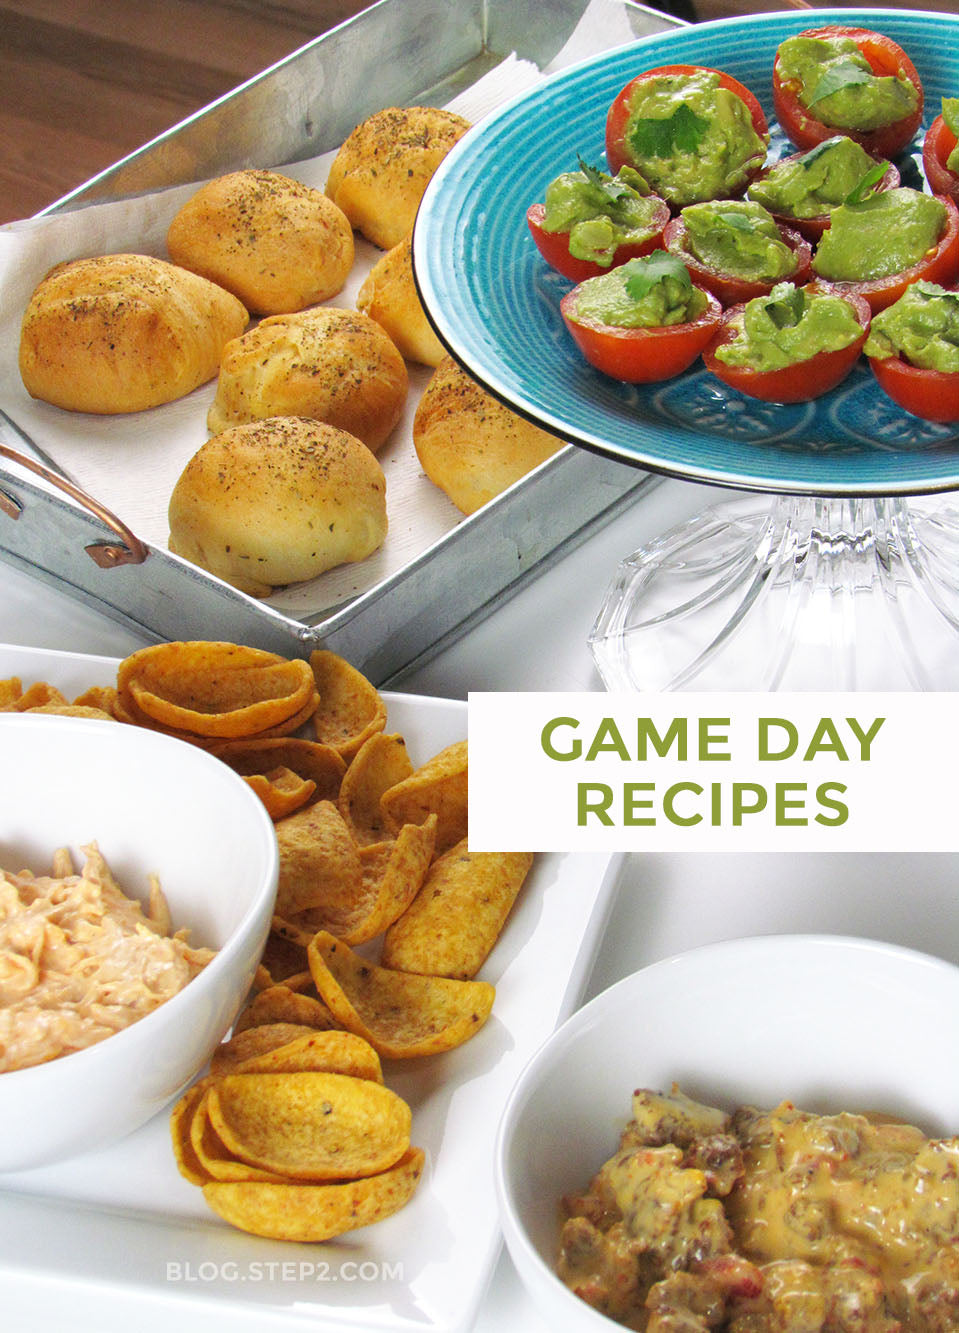 Game Day Super Bowl Party Recipes | Tips from the Step2 Blog